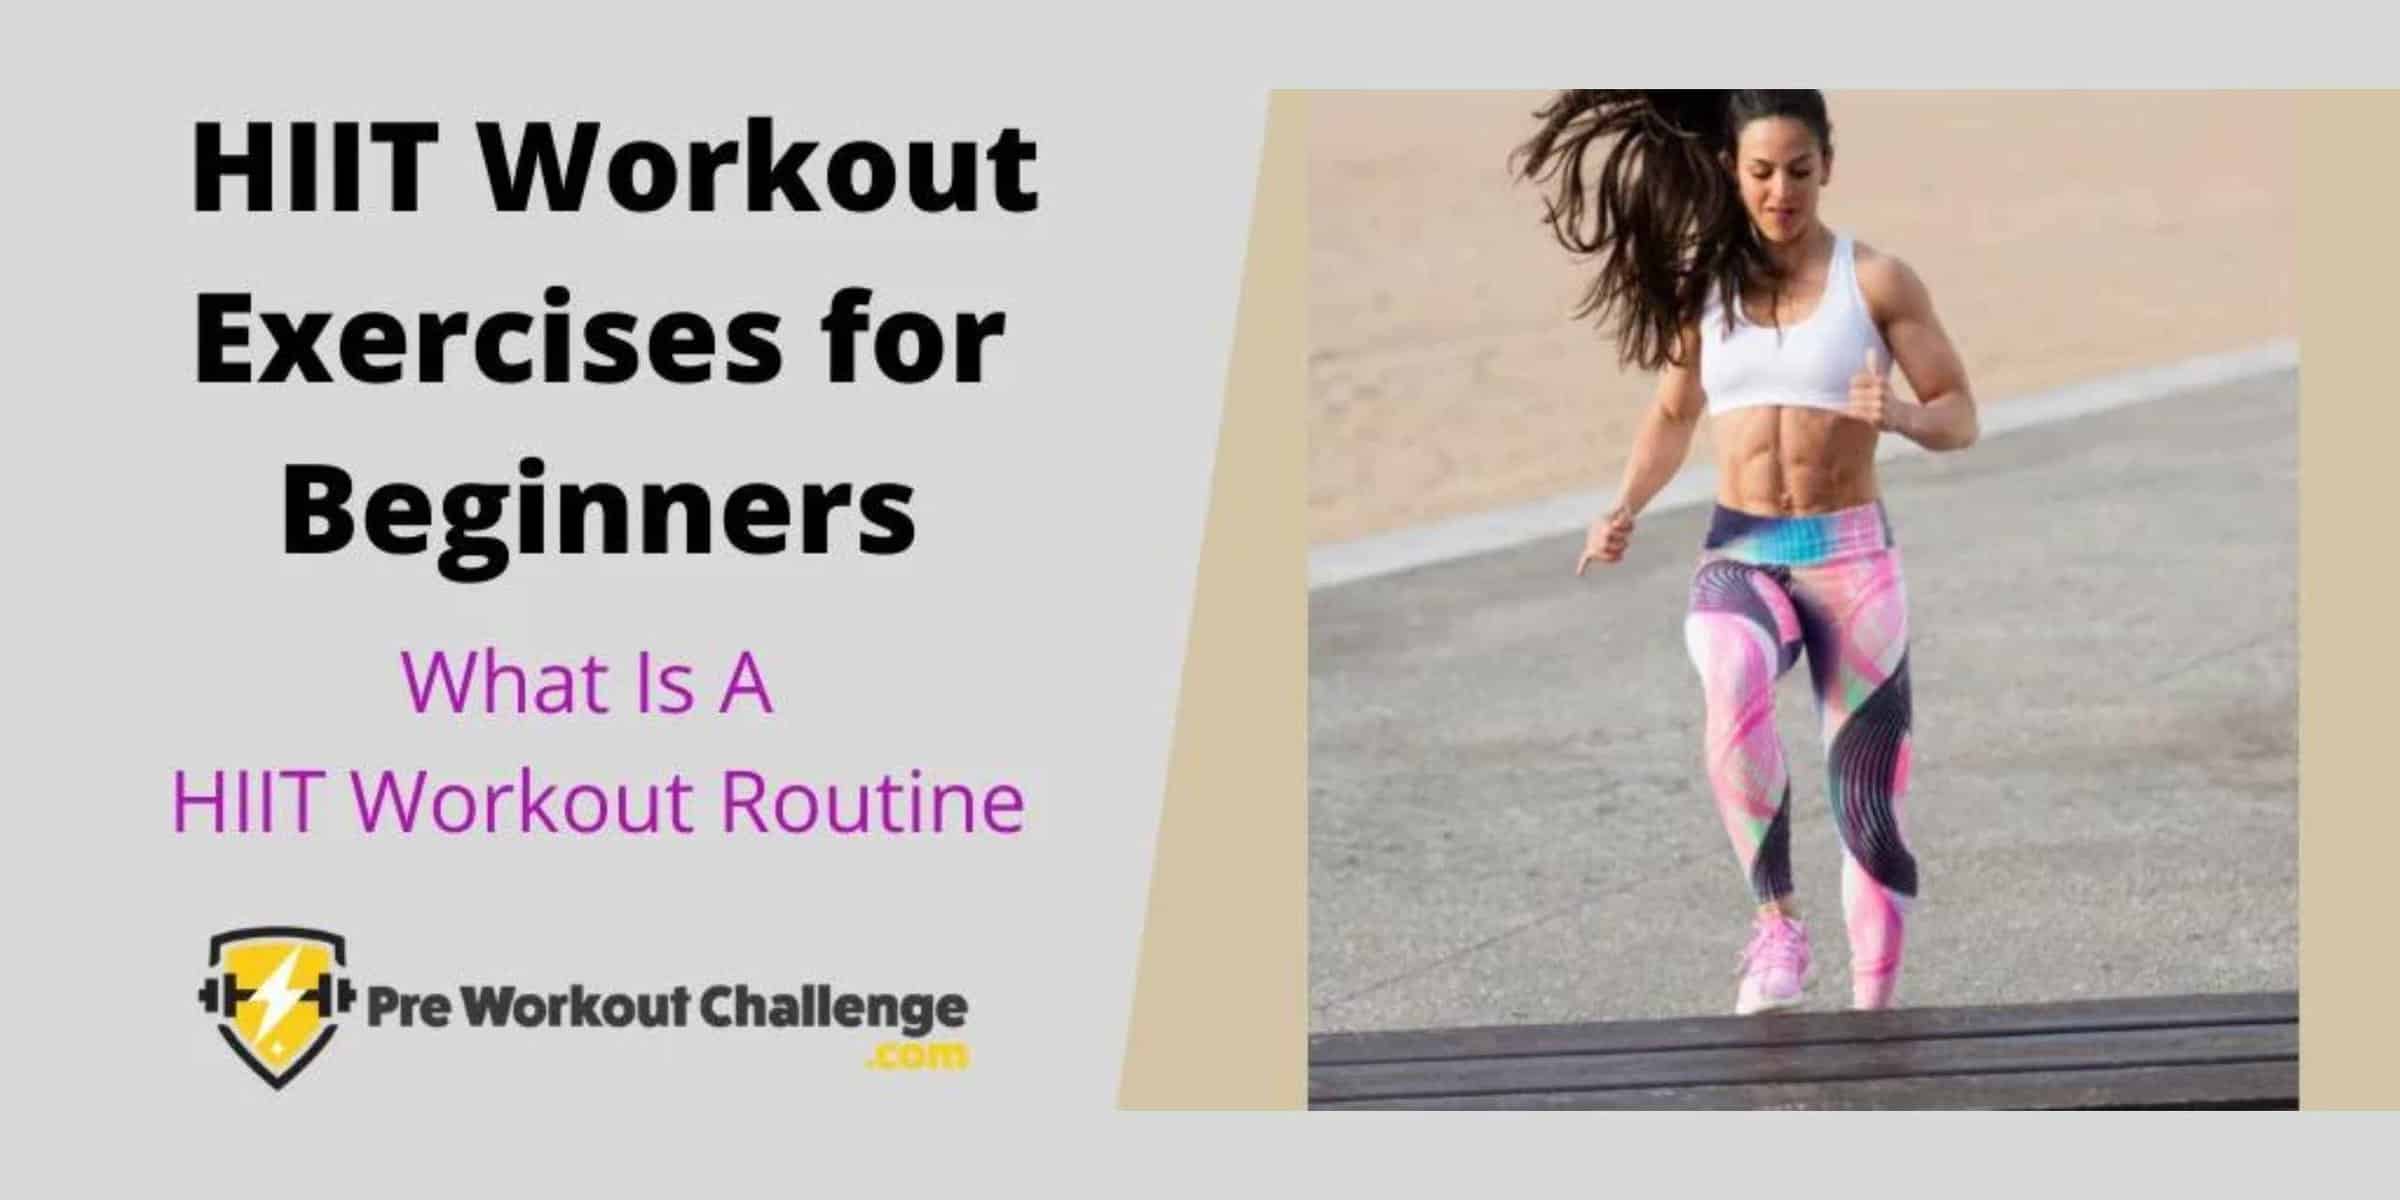 HIIT workout exercises for beginners